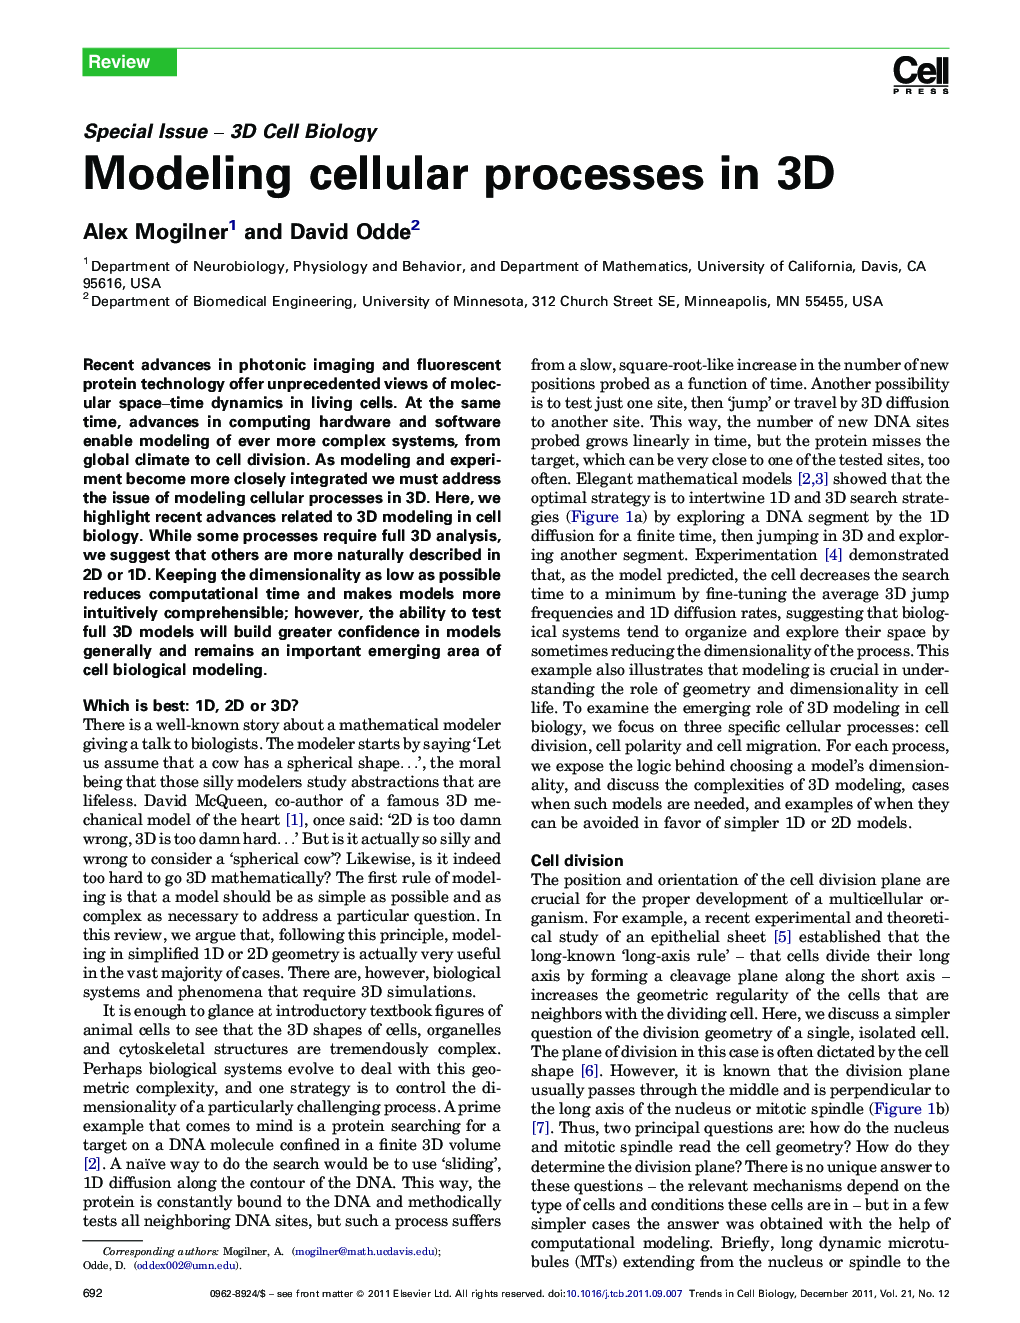 Modeling cellular processes in 3D